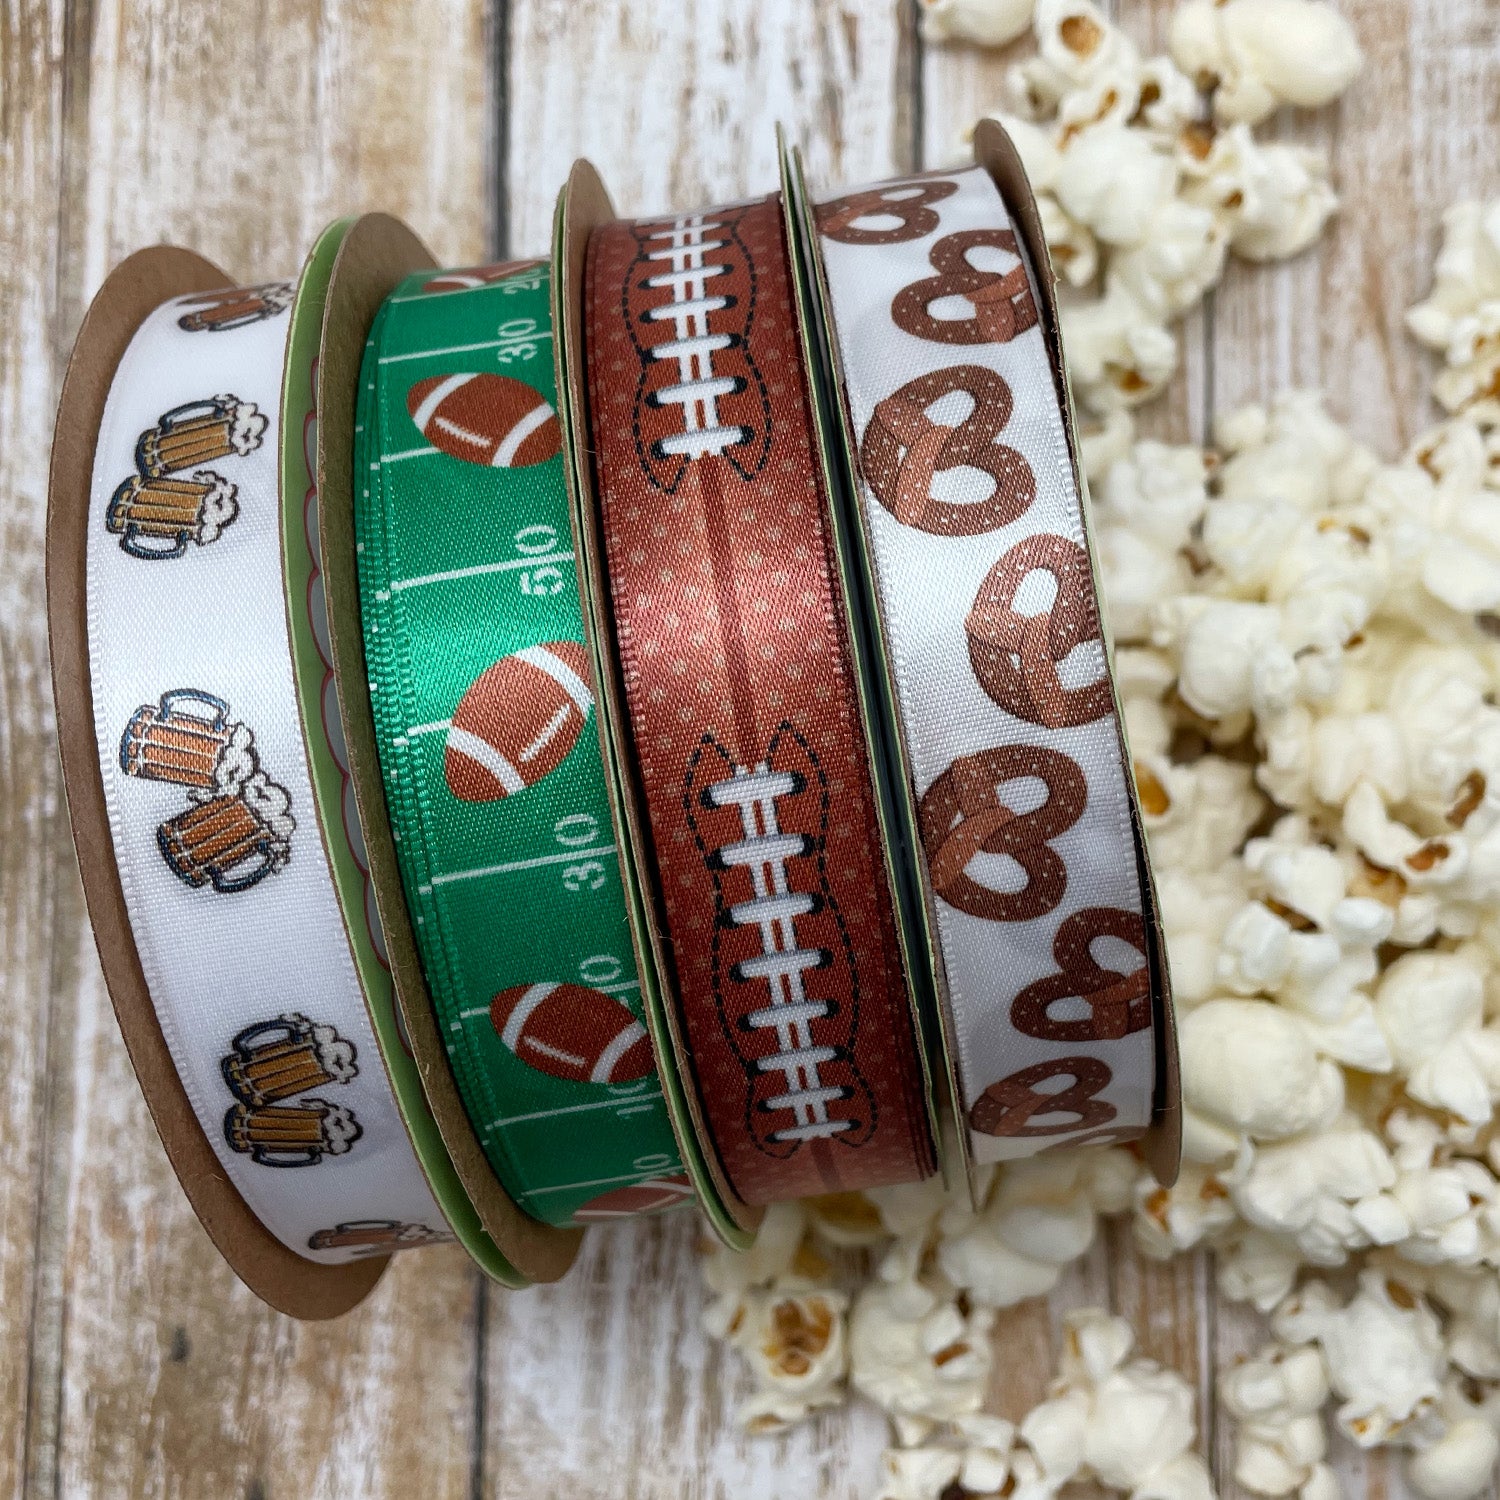 Mix and match or football ribbons with pretzels and beer for the big game decor! 